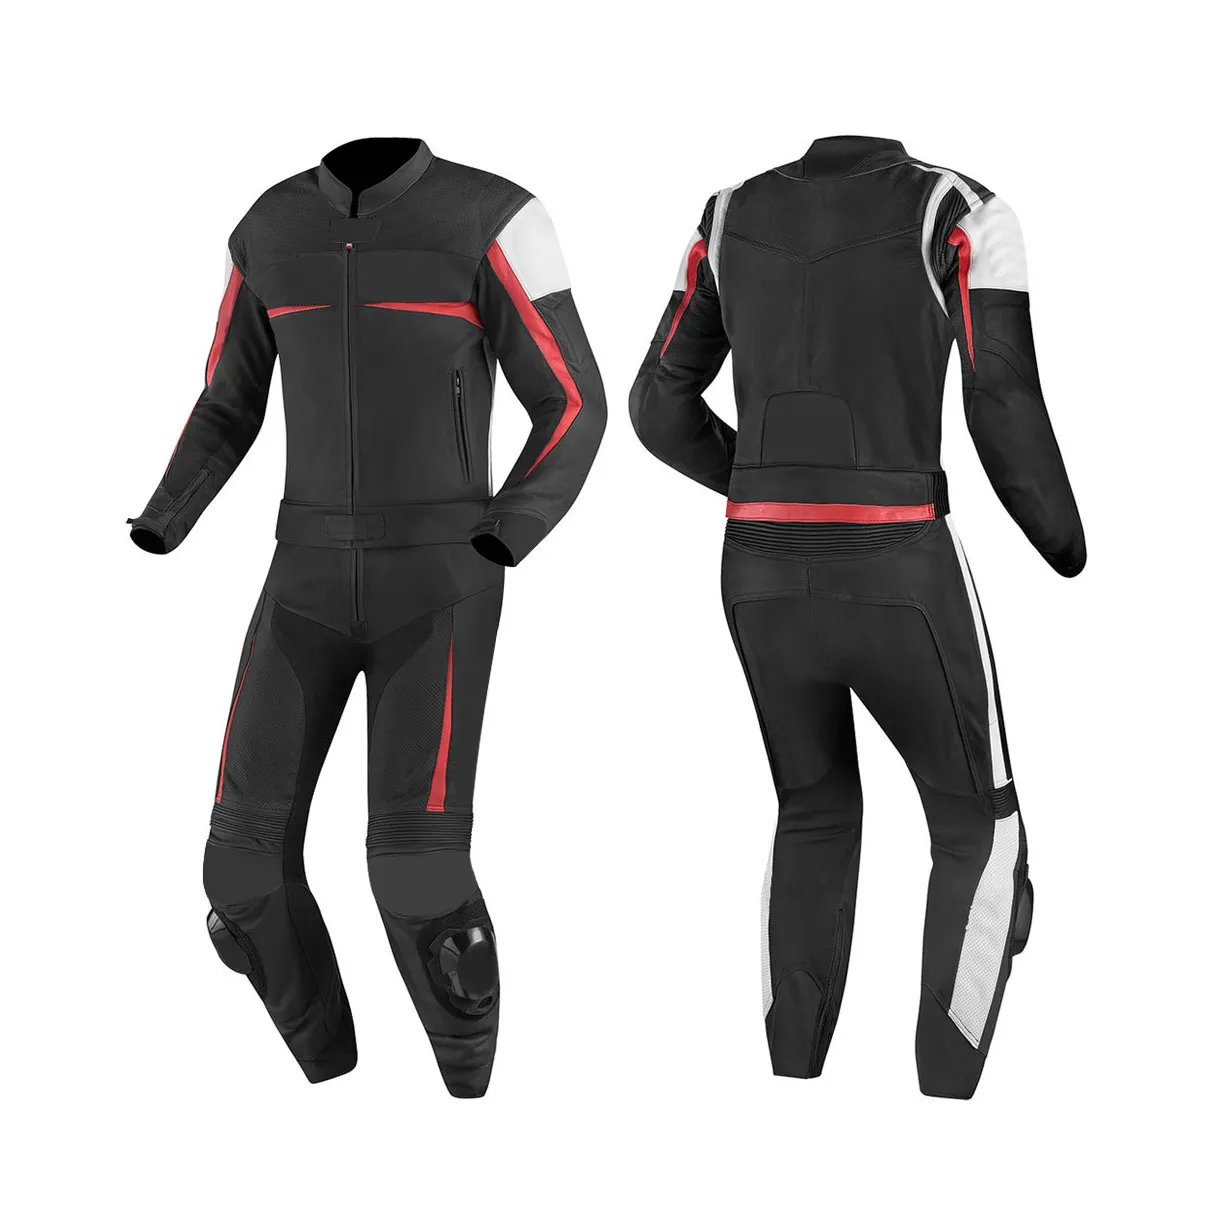 Racing Leather Motorbike Suit Full Protection Leather Motorcycle Suit High Quality Bikers Gears Suit